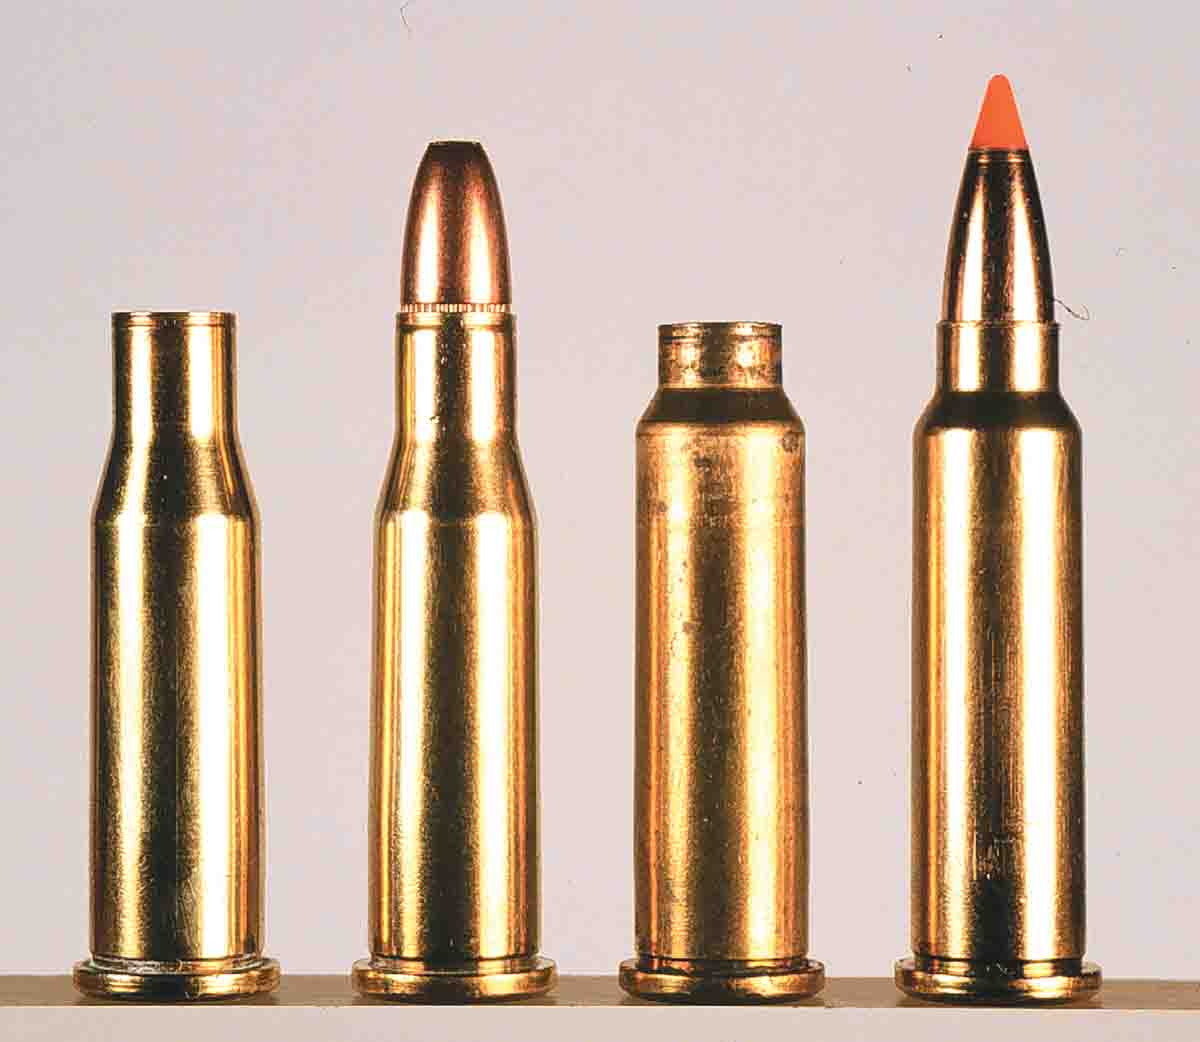 From left to right, the parent .218 Bee case is shown with a loaded .218 Bee factory round, a fireformed .218 Mashburn Bee and a loaded version.